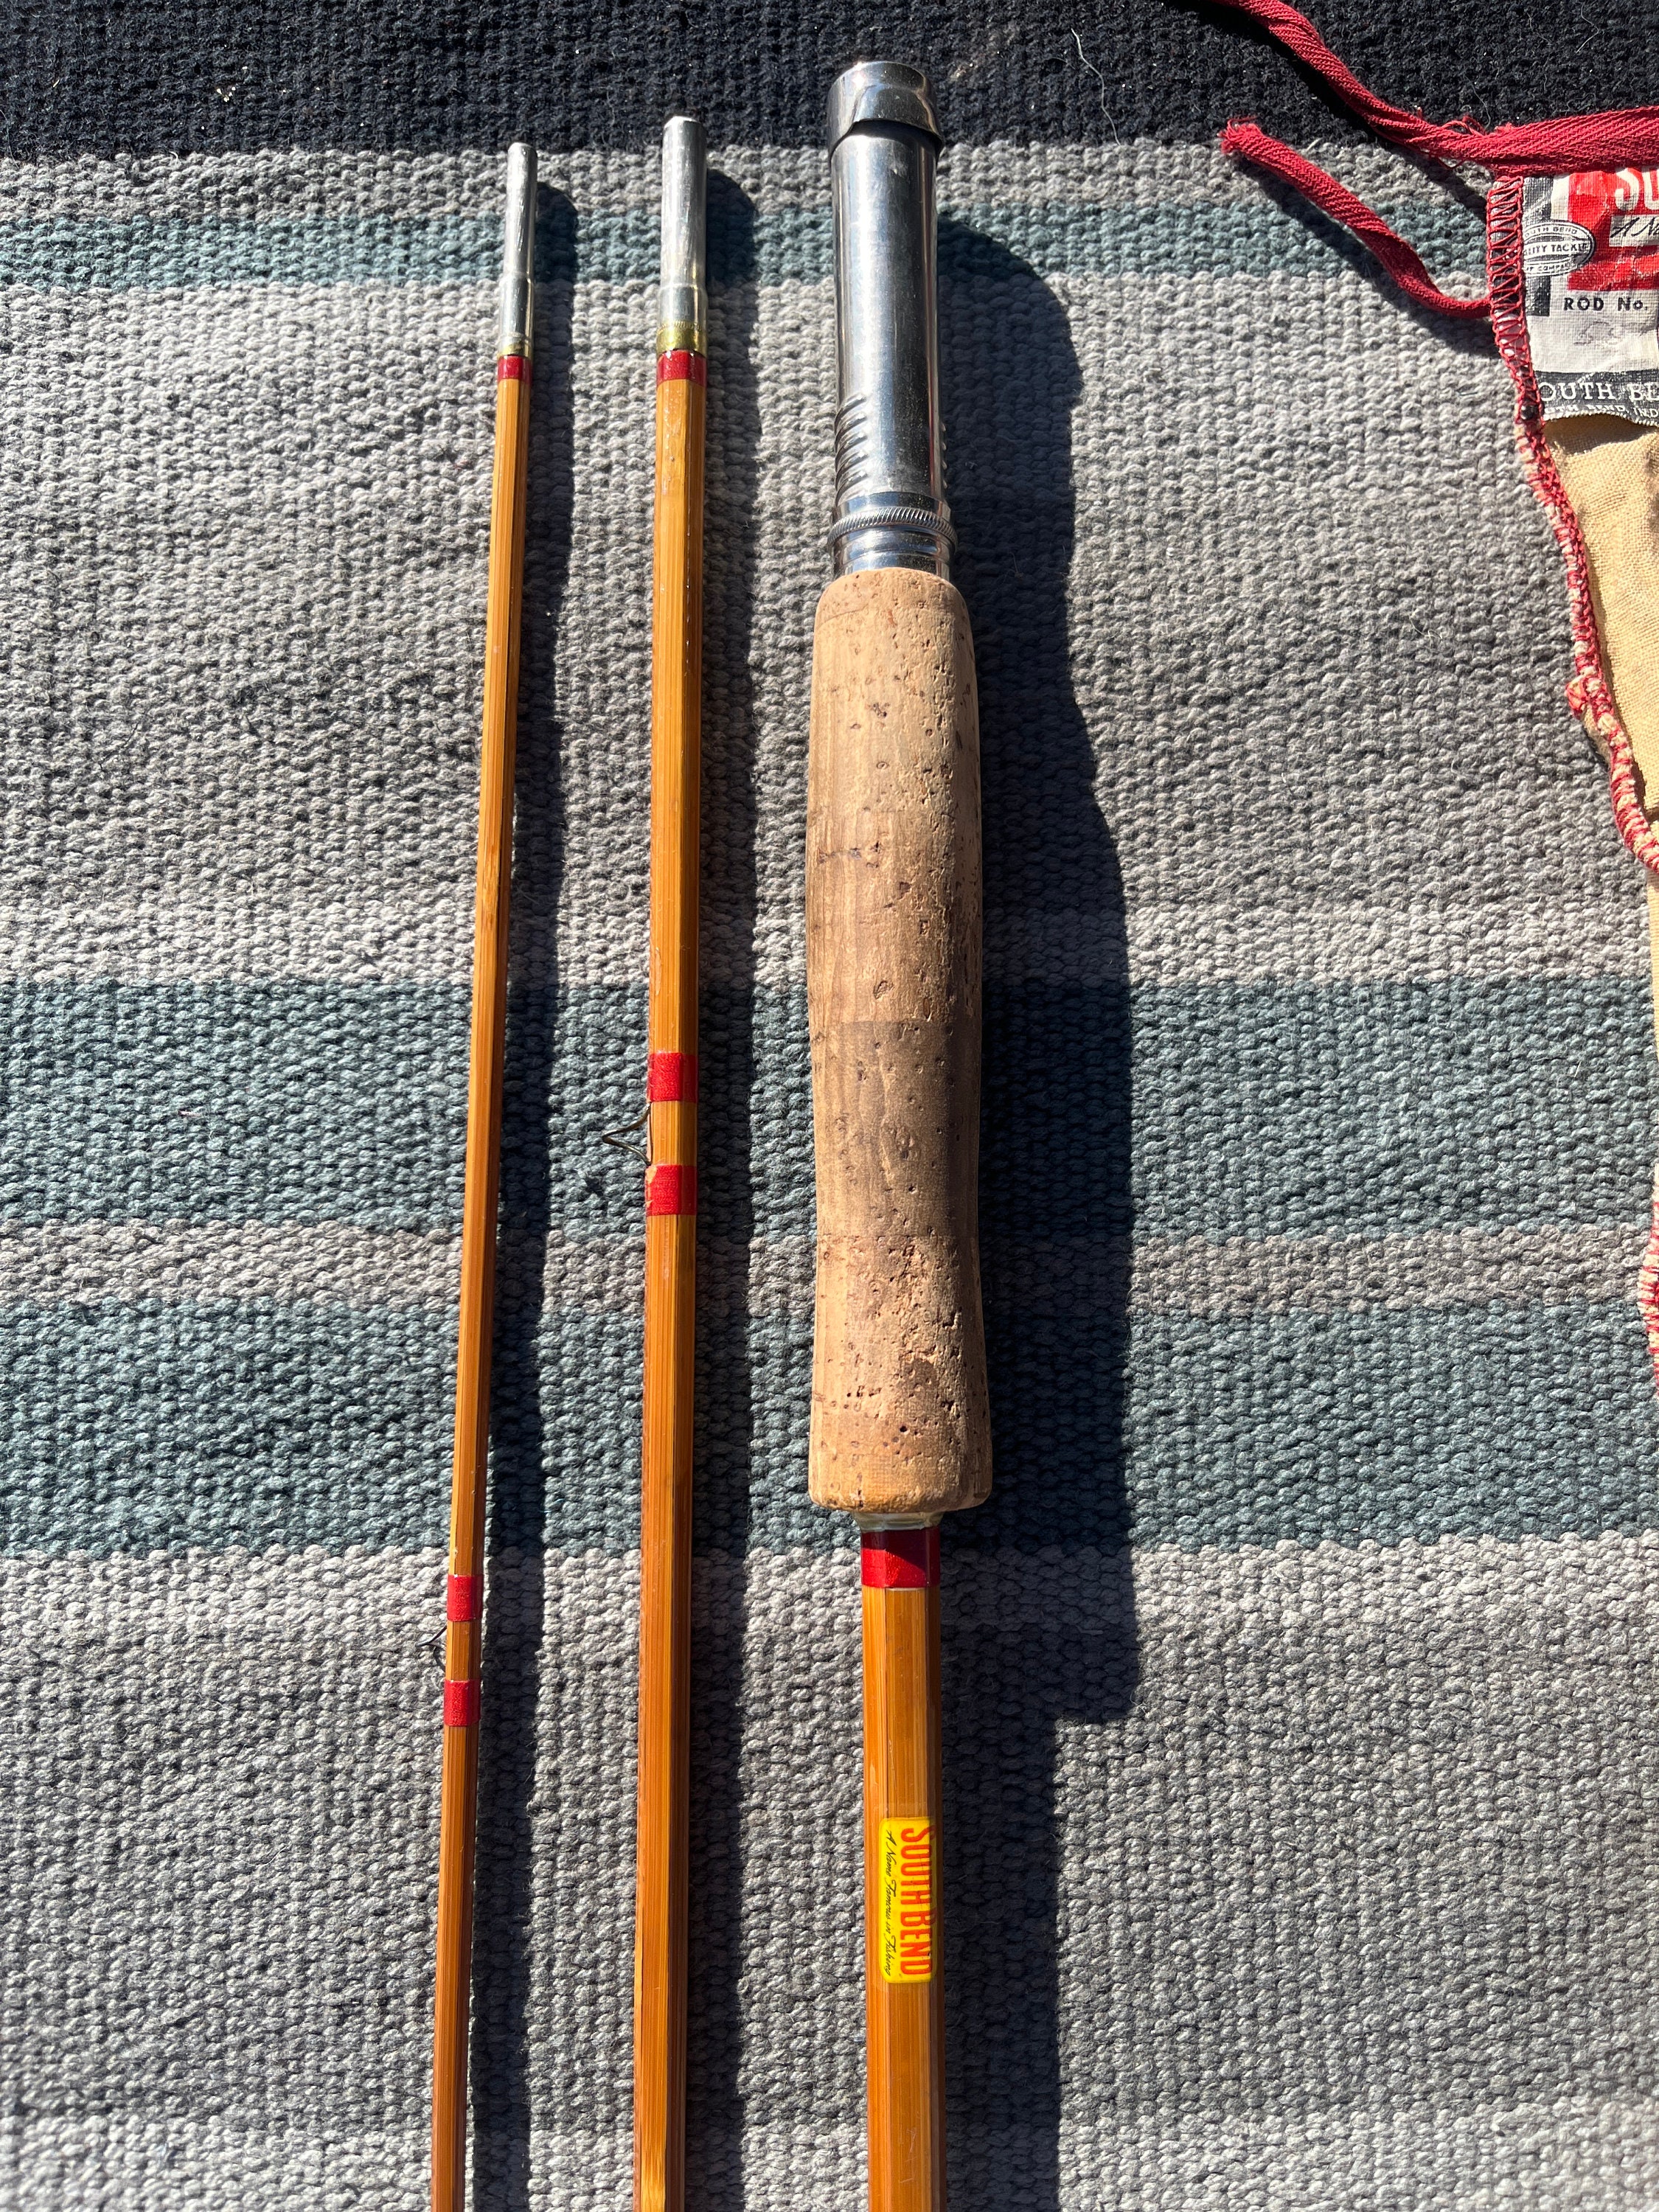 Antique and Collectible Fishing Rods Online